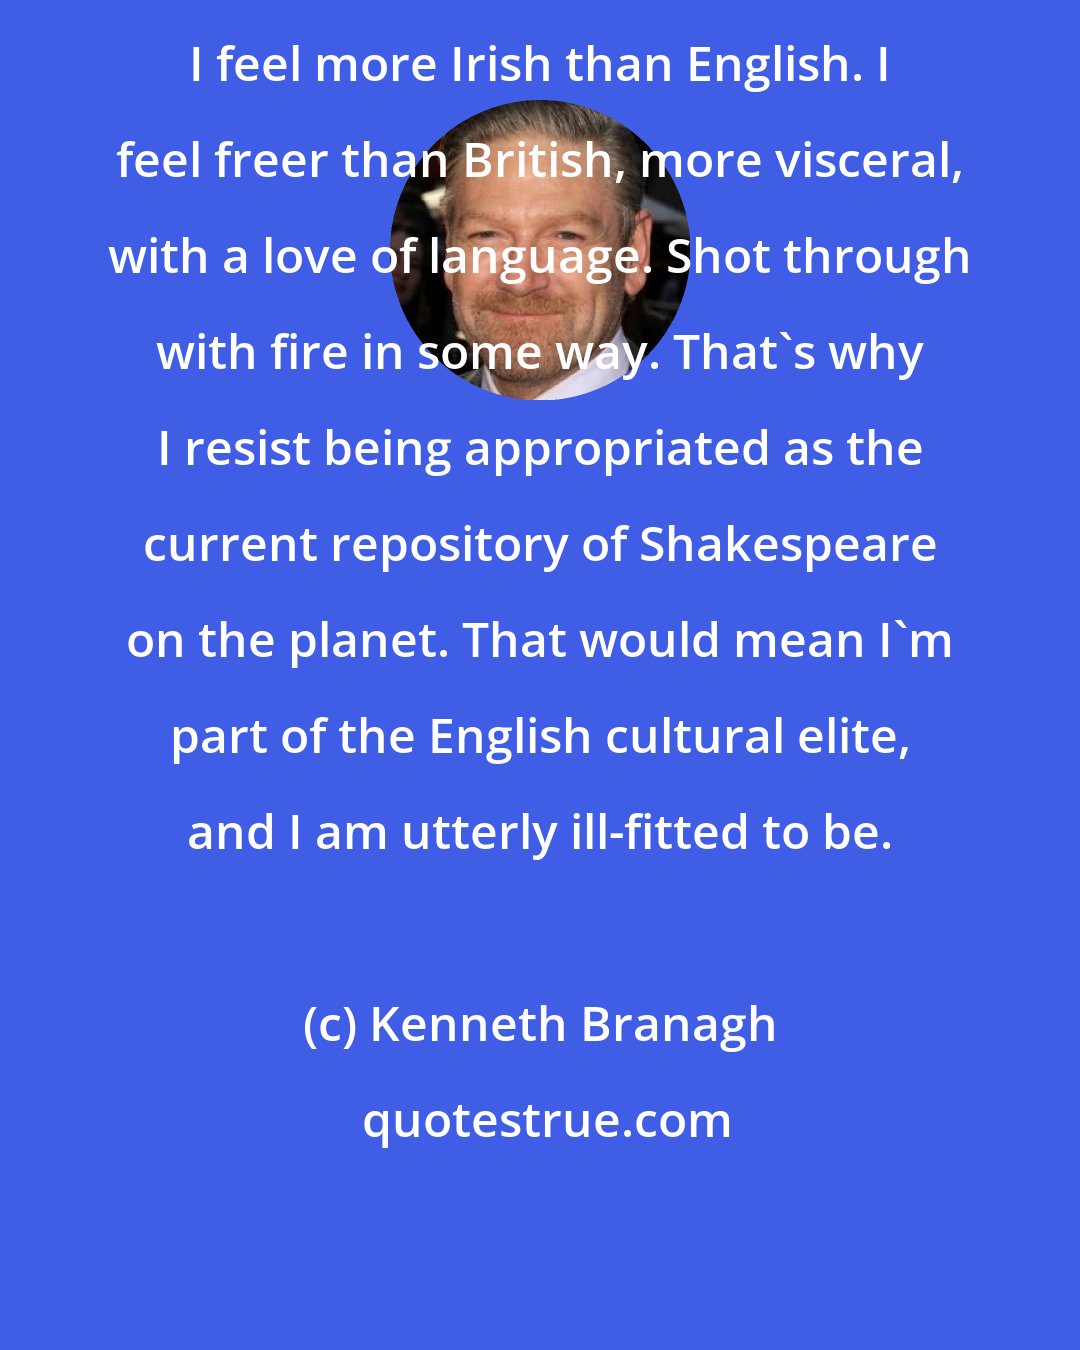 Kenneth Branagh: I feel more Irish than English. I feel freer than British, more visceral, with a love of language. Shot through with fire in some way. That's why I resist being appropriated as the current repository of Shakespeare on the planet. That would mean I'm part of the English cultural elite, and I am utterly ill-fitted to be.